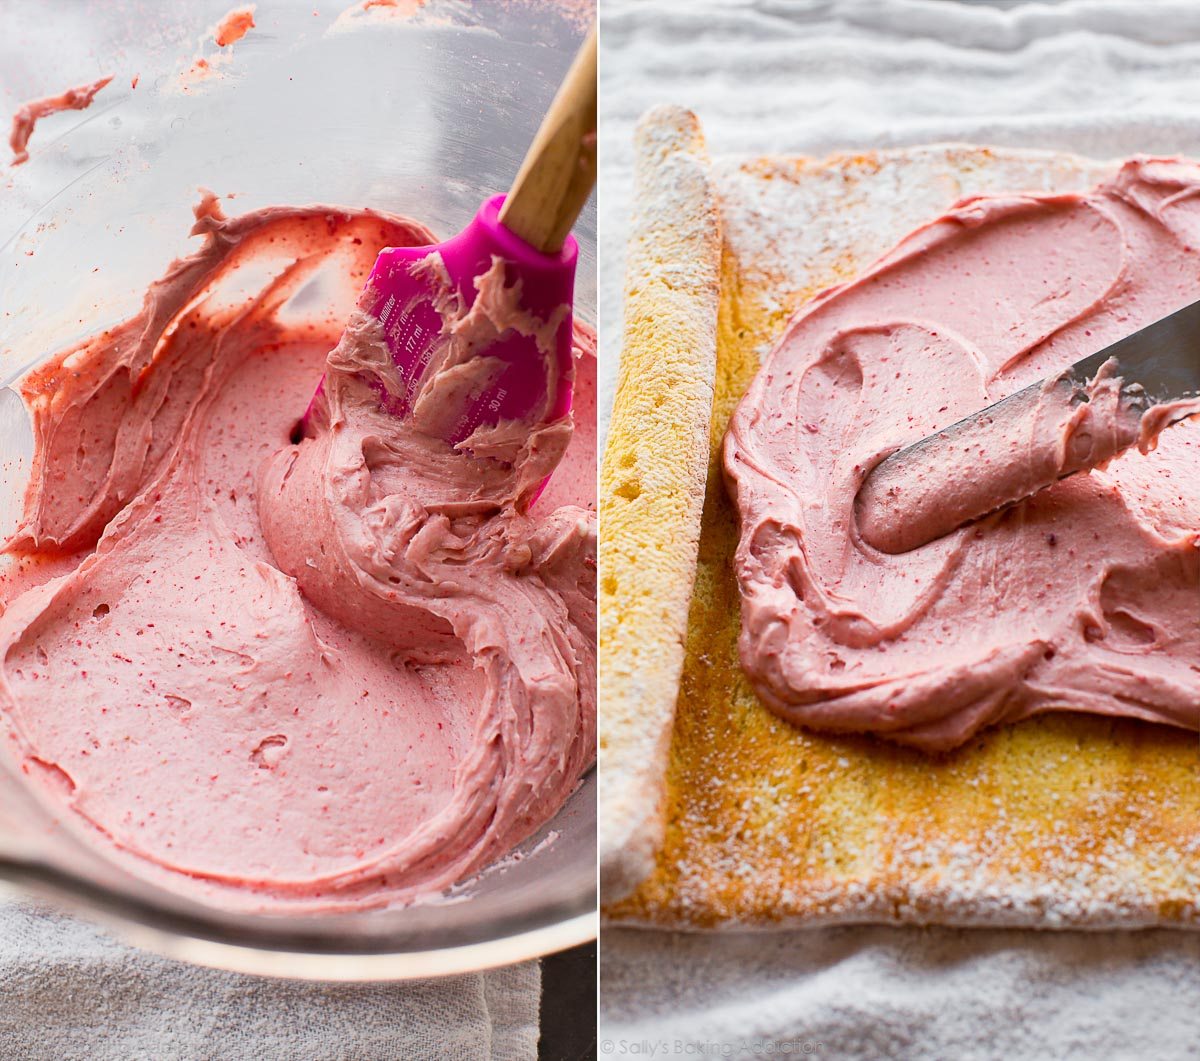 2 images of strawberry cream cheese frosting in a glass bowl and spreading strawberry cream cheese frosting onto sponge cake